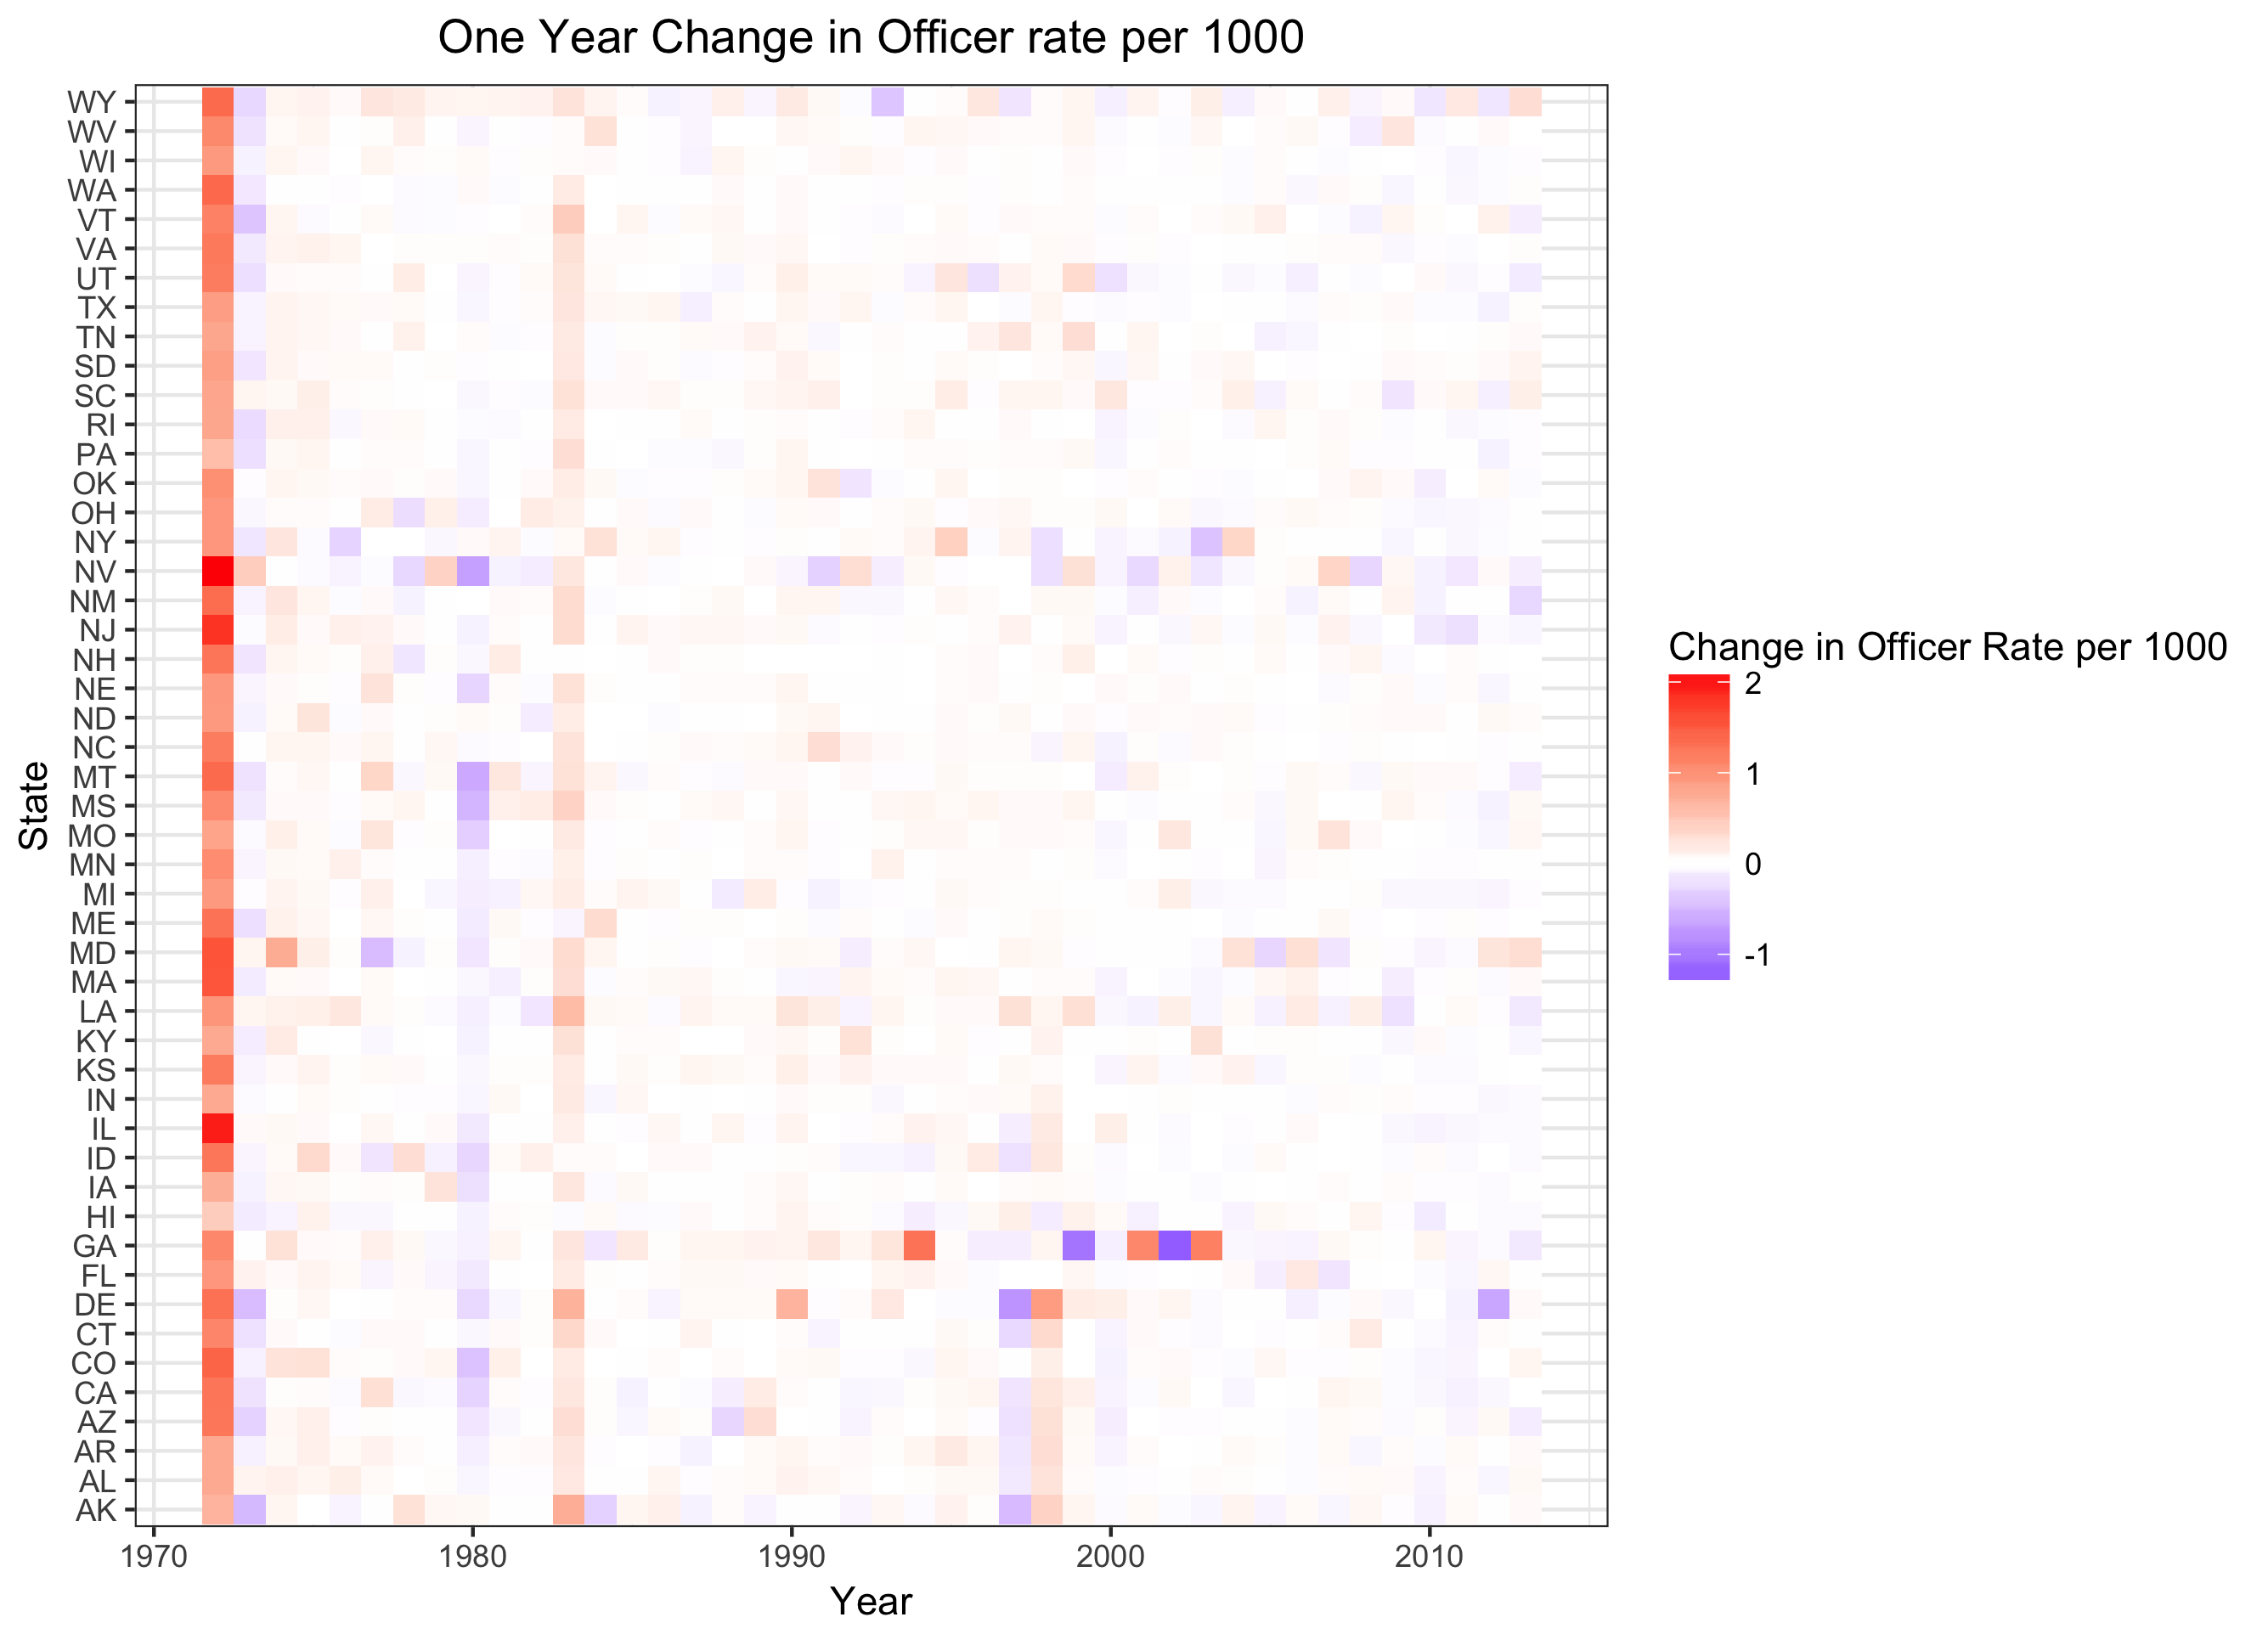 One year change in officers per 1000